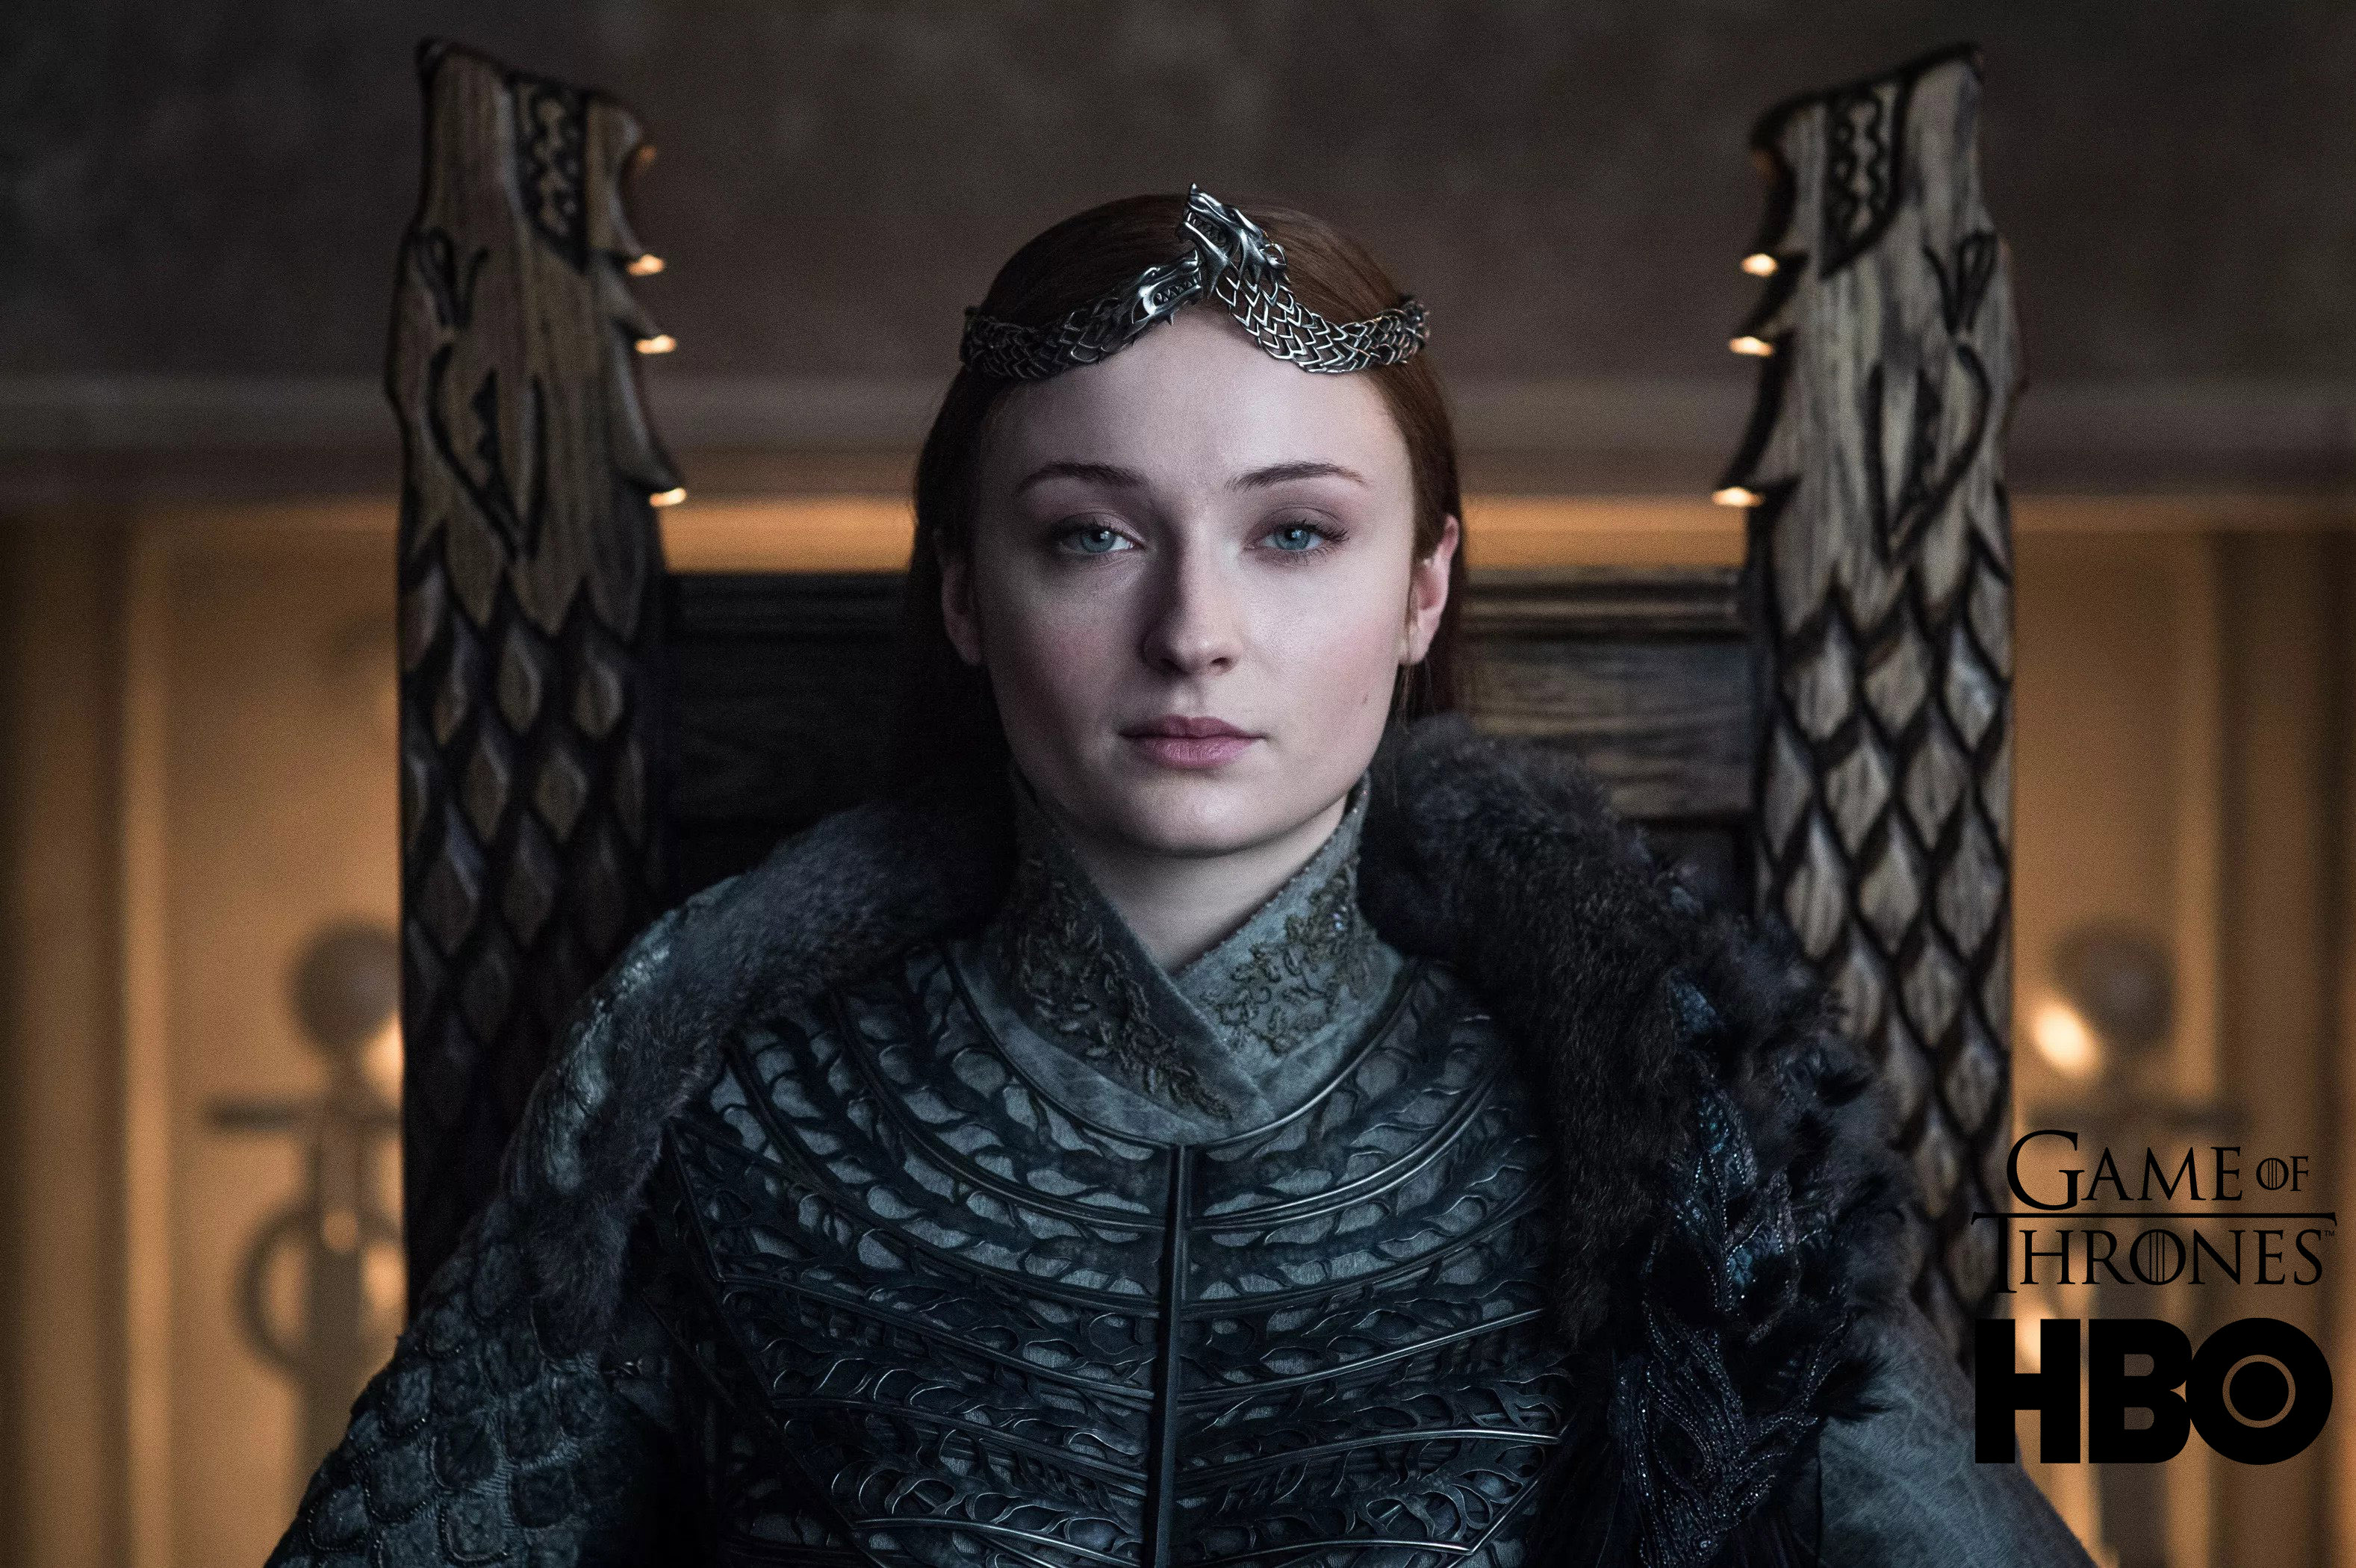 Game of Thrones ending got you down? Check out this book list of amazing endings